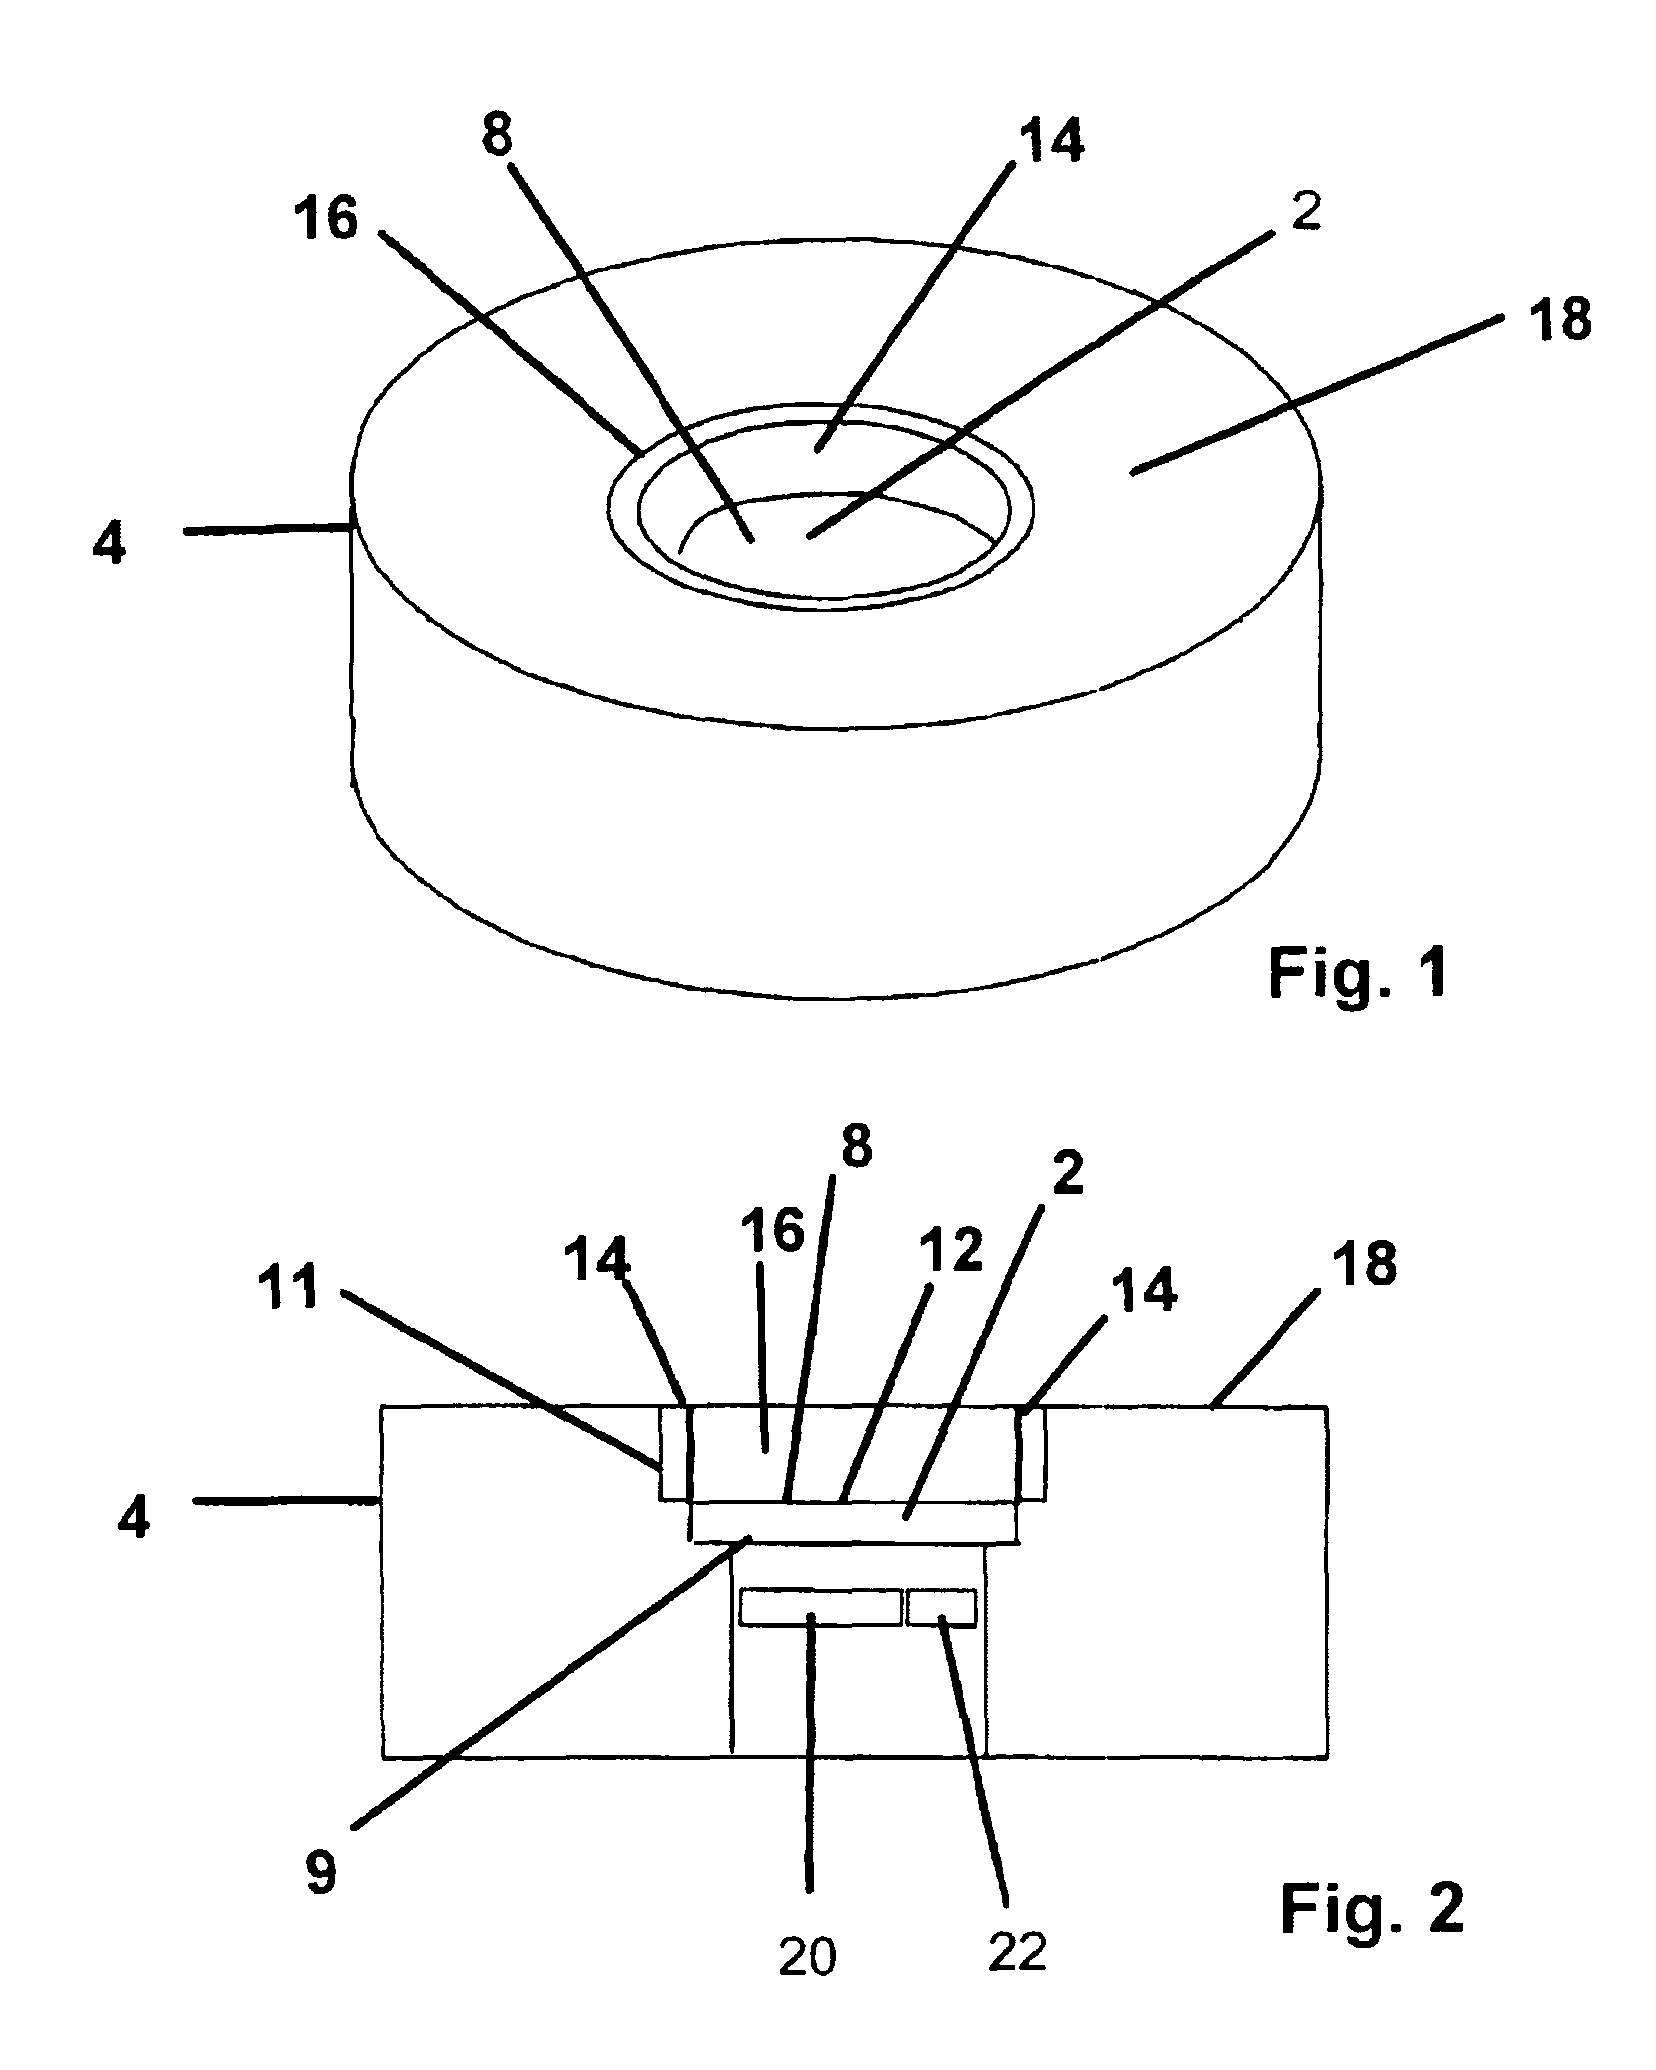 Apparatus for displaying an object having relief